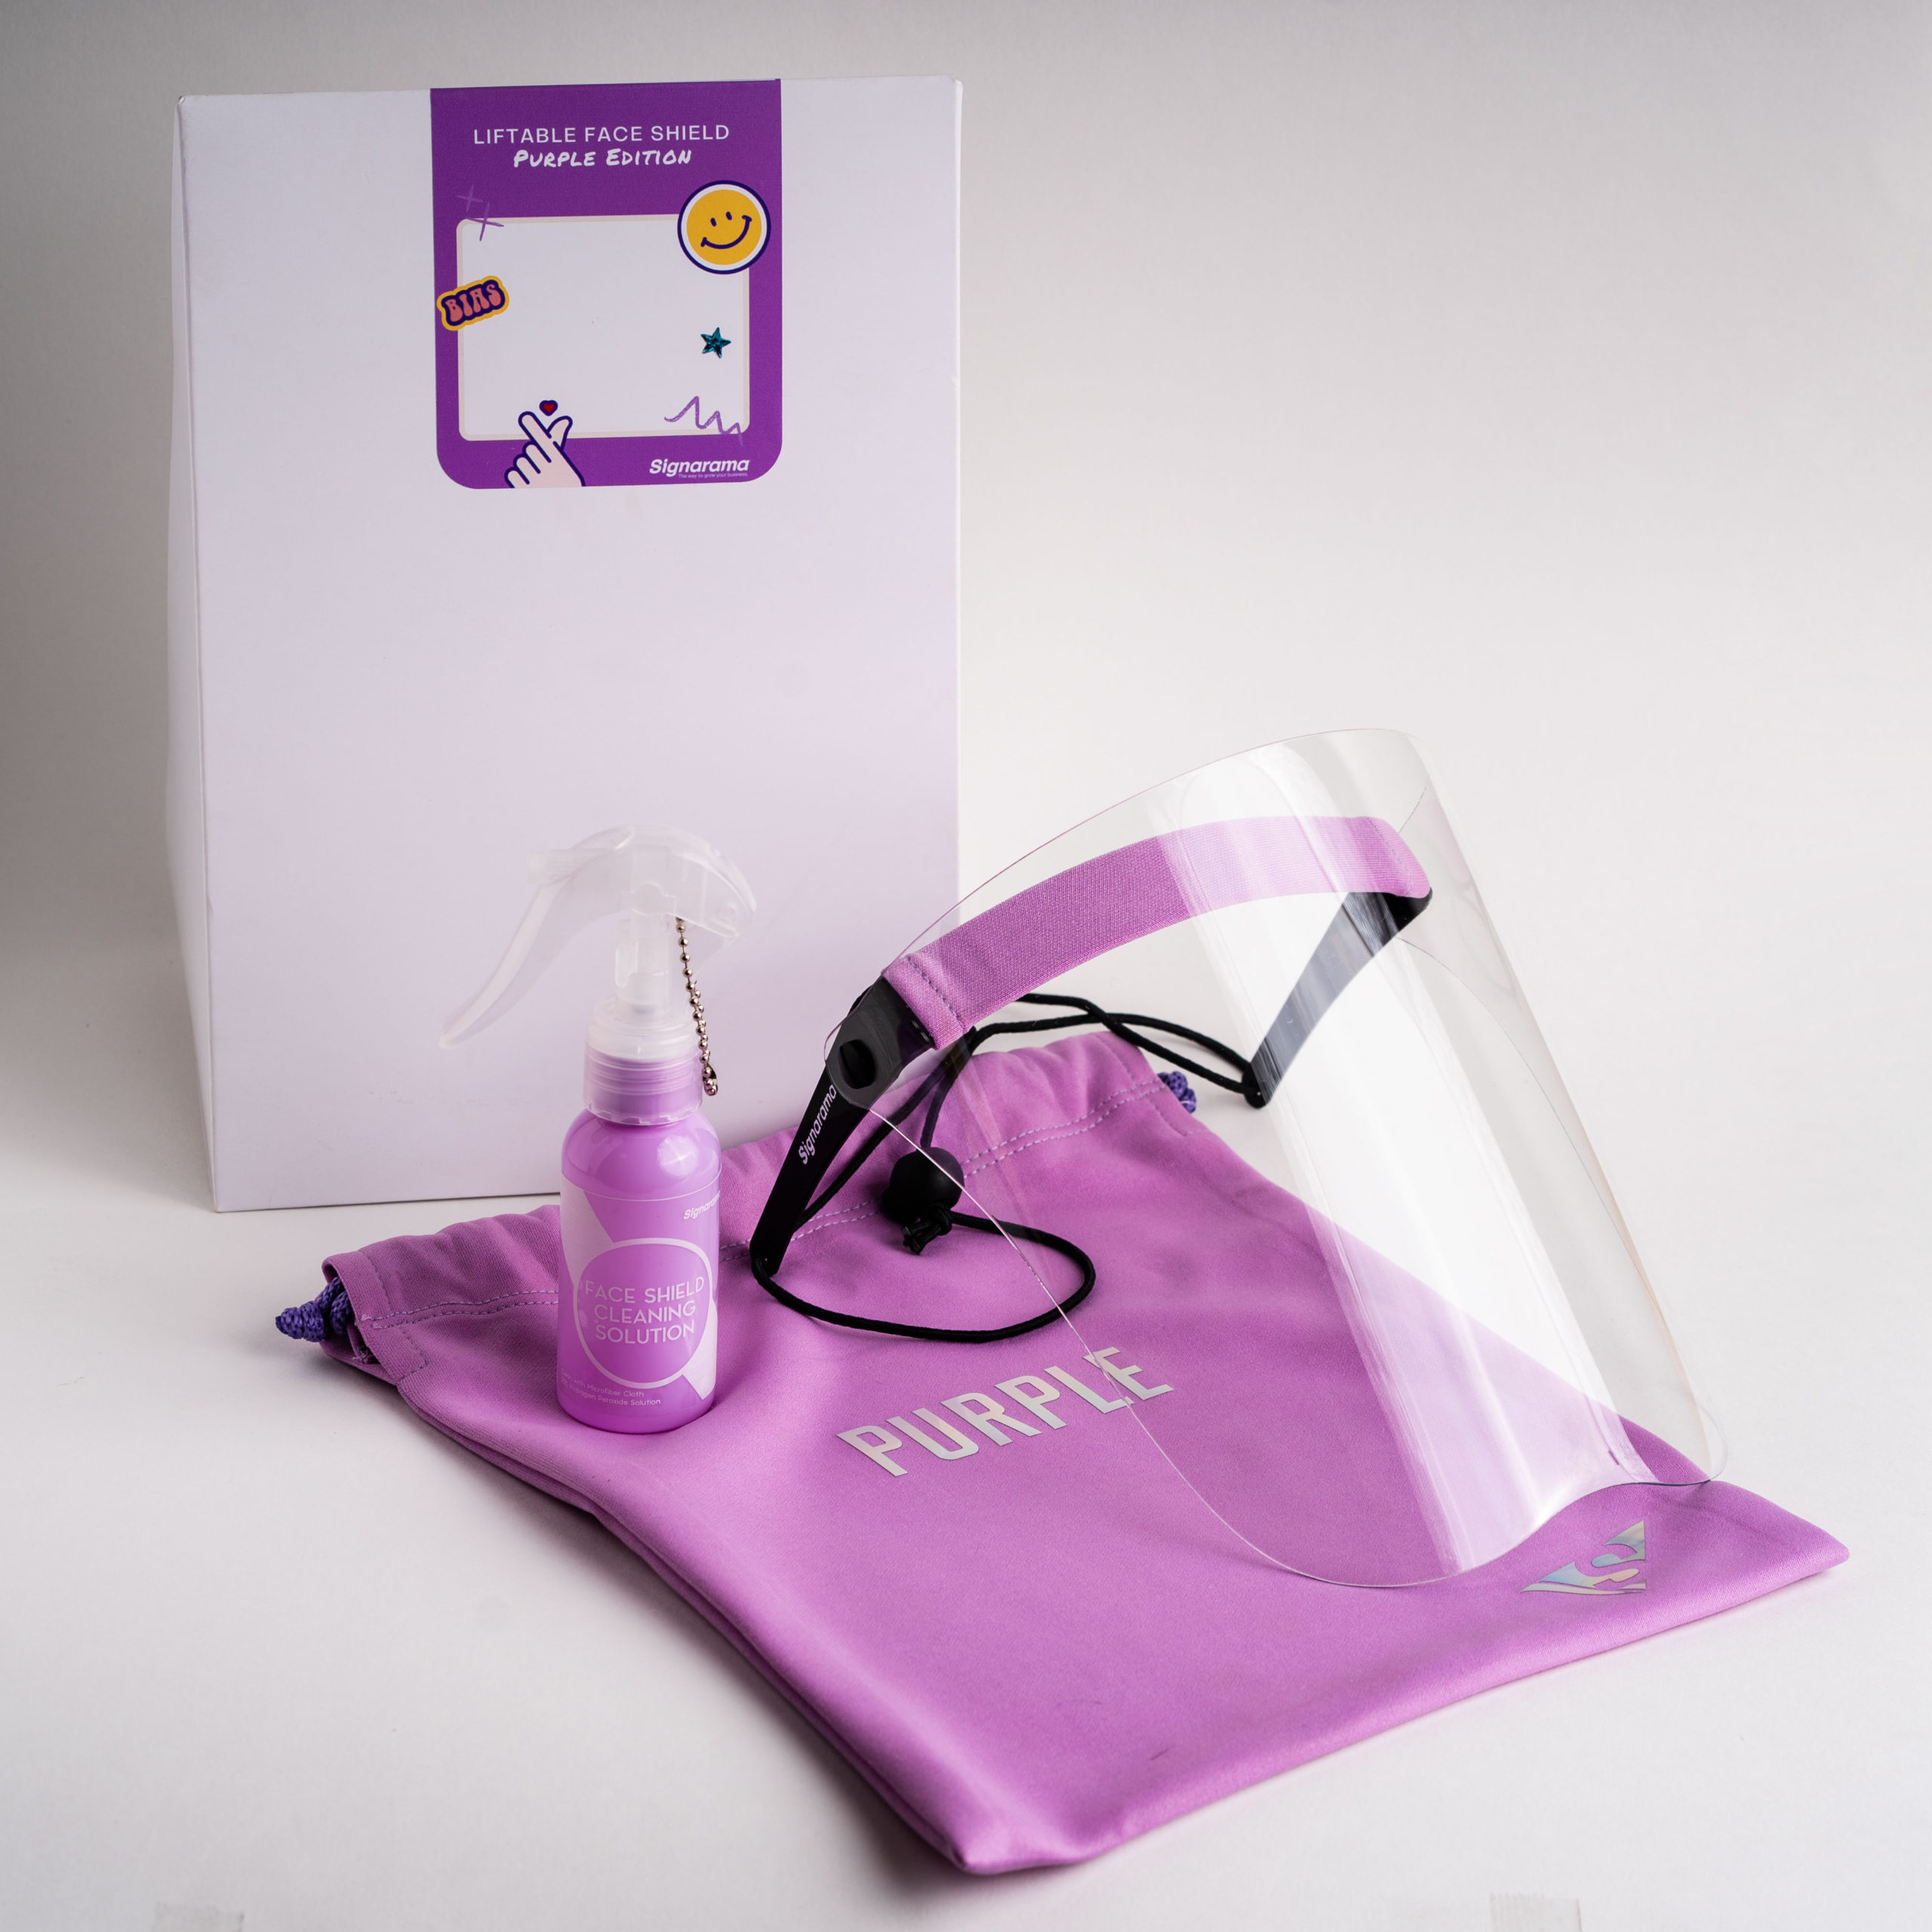 Liftable Face Shield and Pouch Combo – Purple Edition